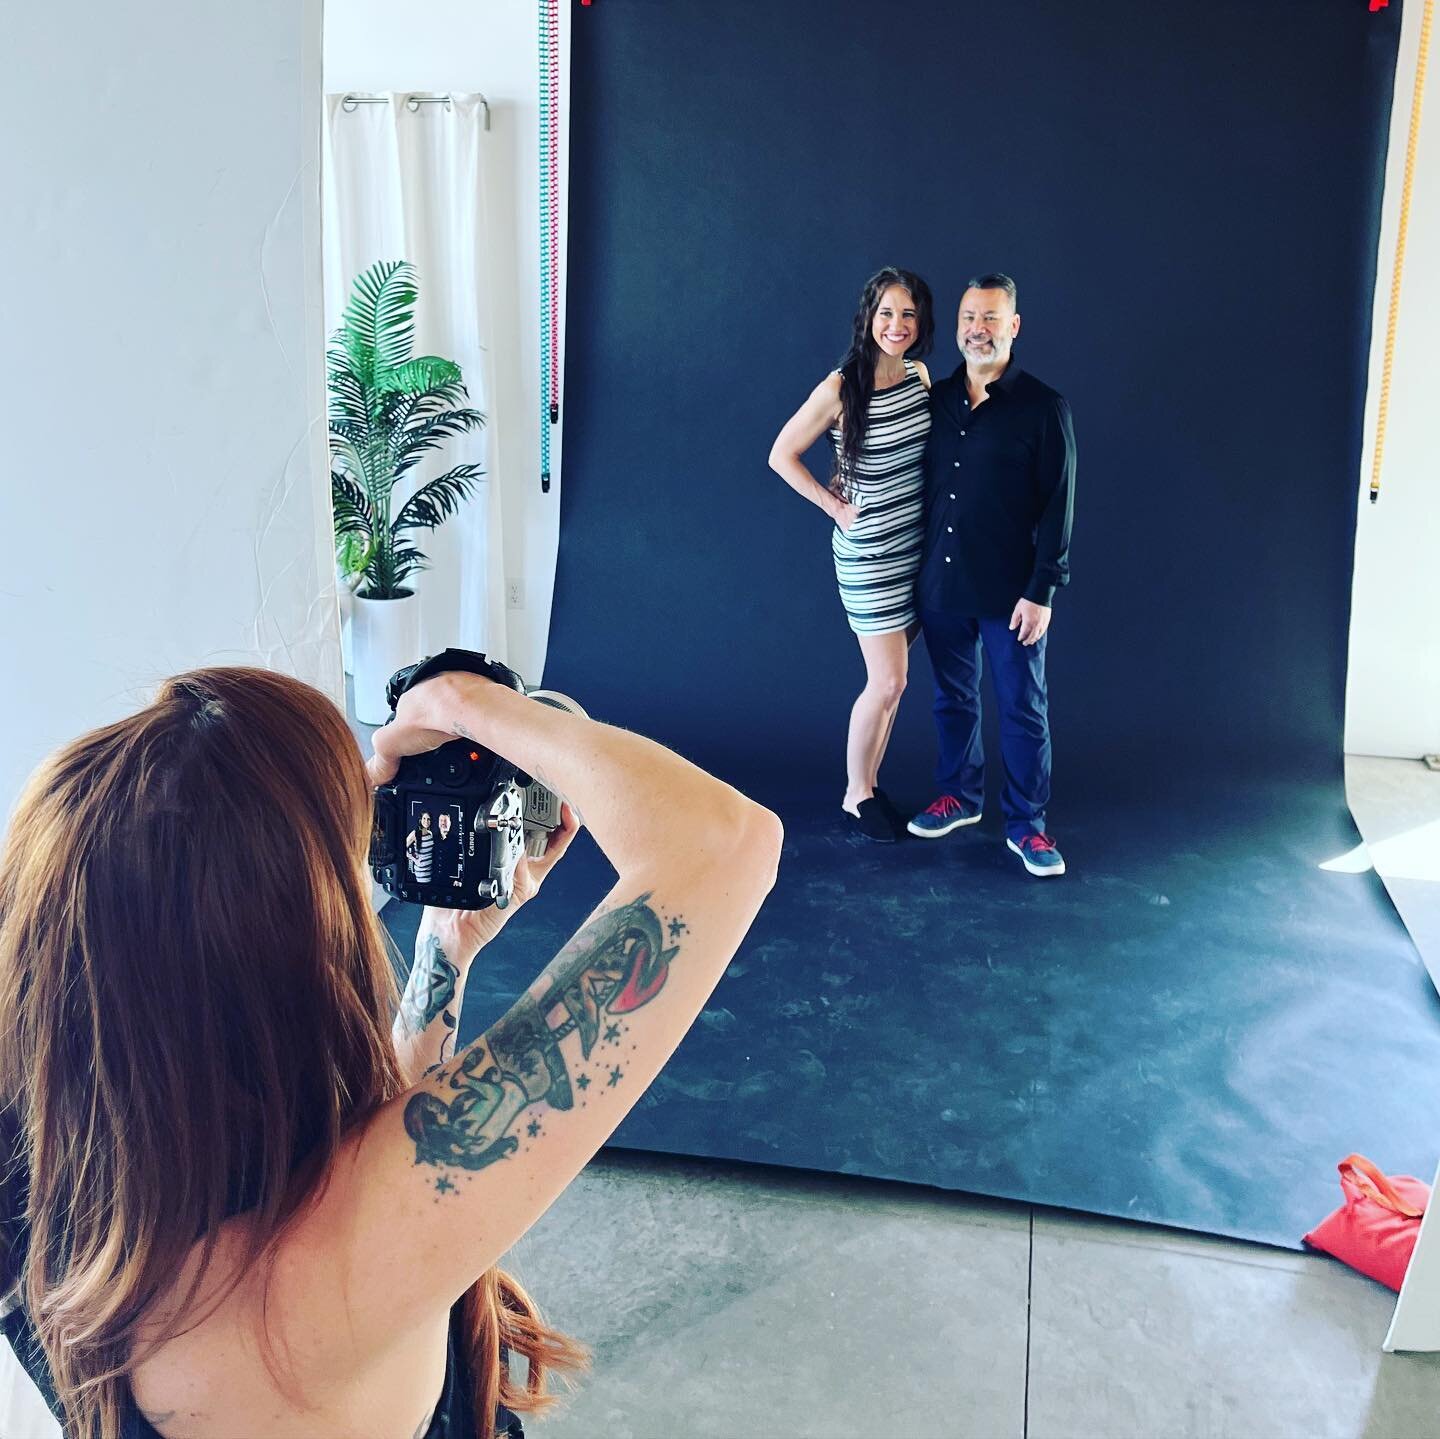 Getting back on track in the studio with KC Photographer @karapayton_ and her chiropractor clients with this branding shoot. She focused her energy and felt no pressure while shooting their portraits in natural light on a white seamless using our fre